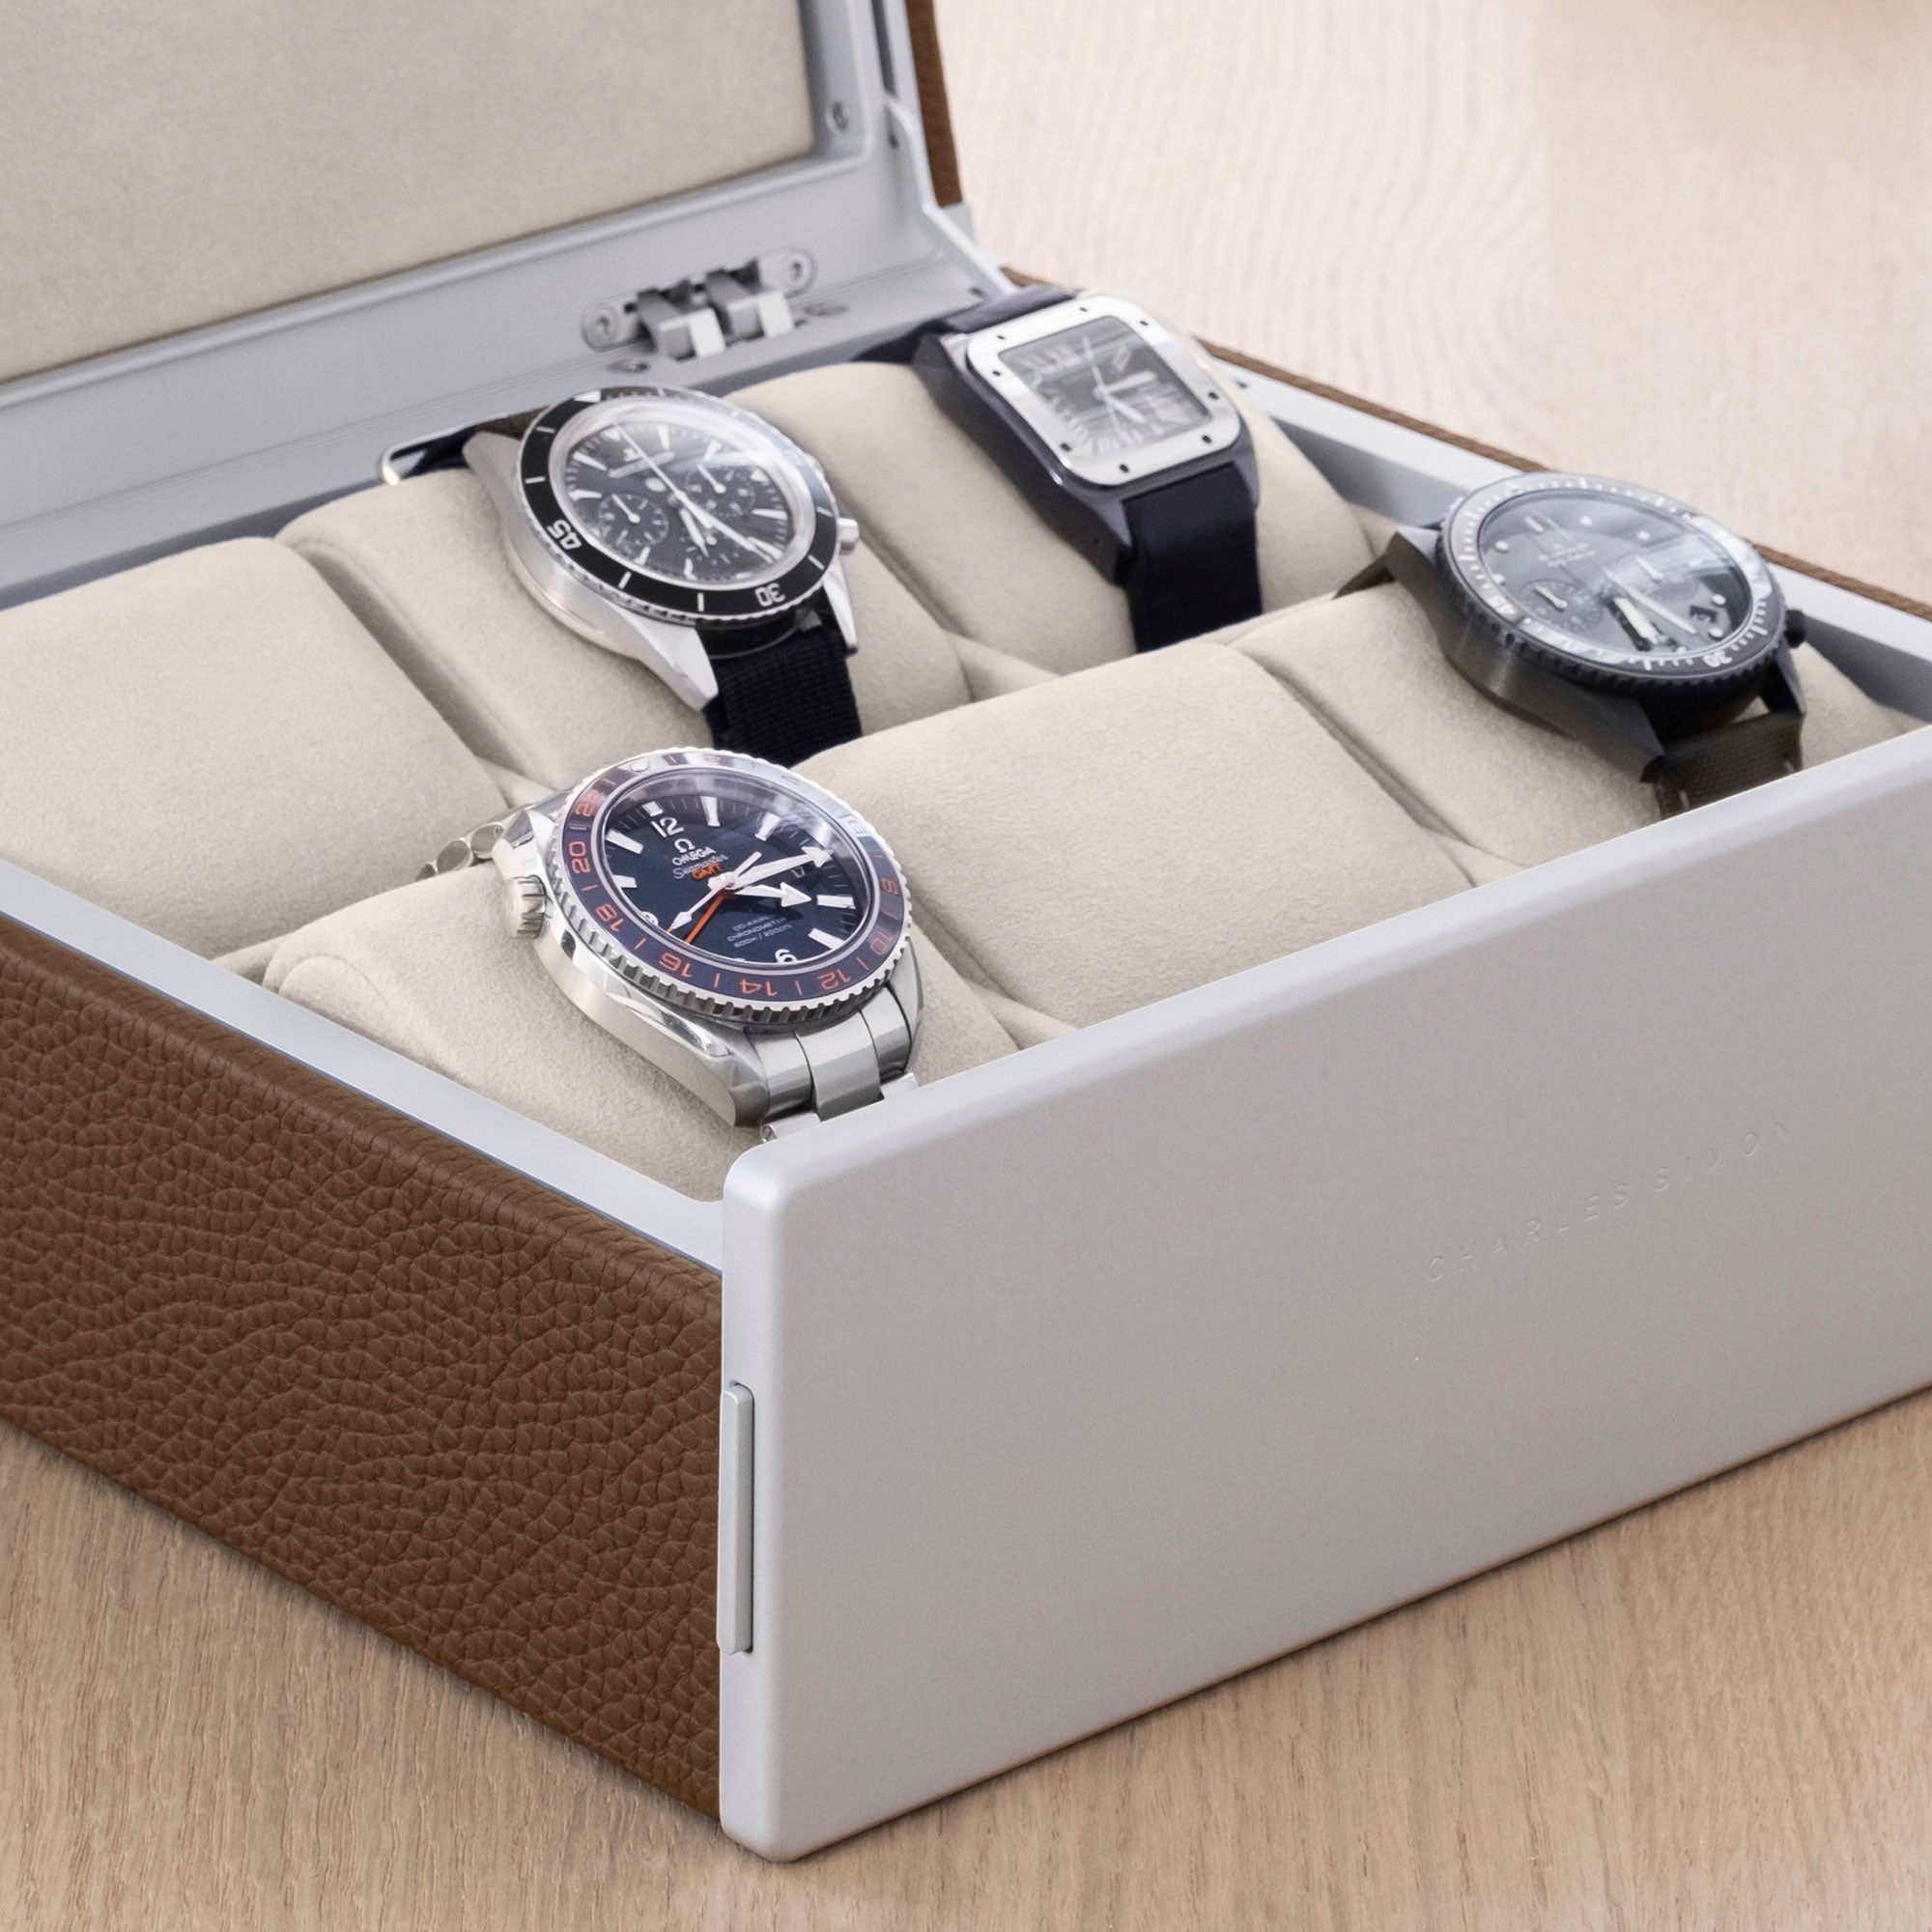 Lifestyle shot of Spence luxury watch box for 6 watches in tan leather filled with men's watches including Blancpain, Omega and Jaeger Lecoultre placed on removable eggshell Alcantara cushions